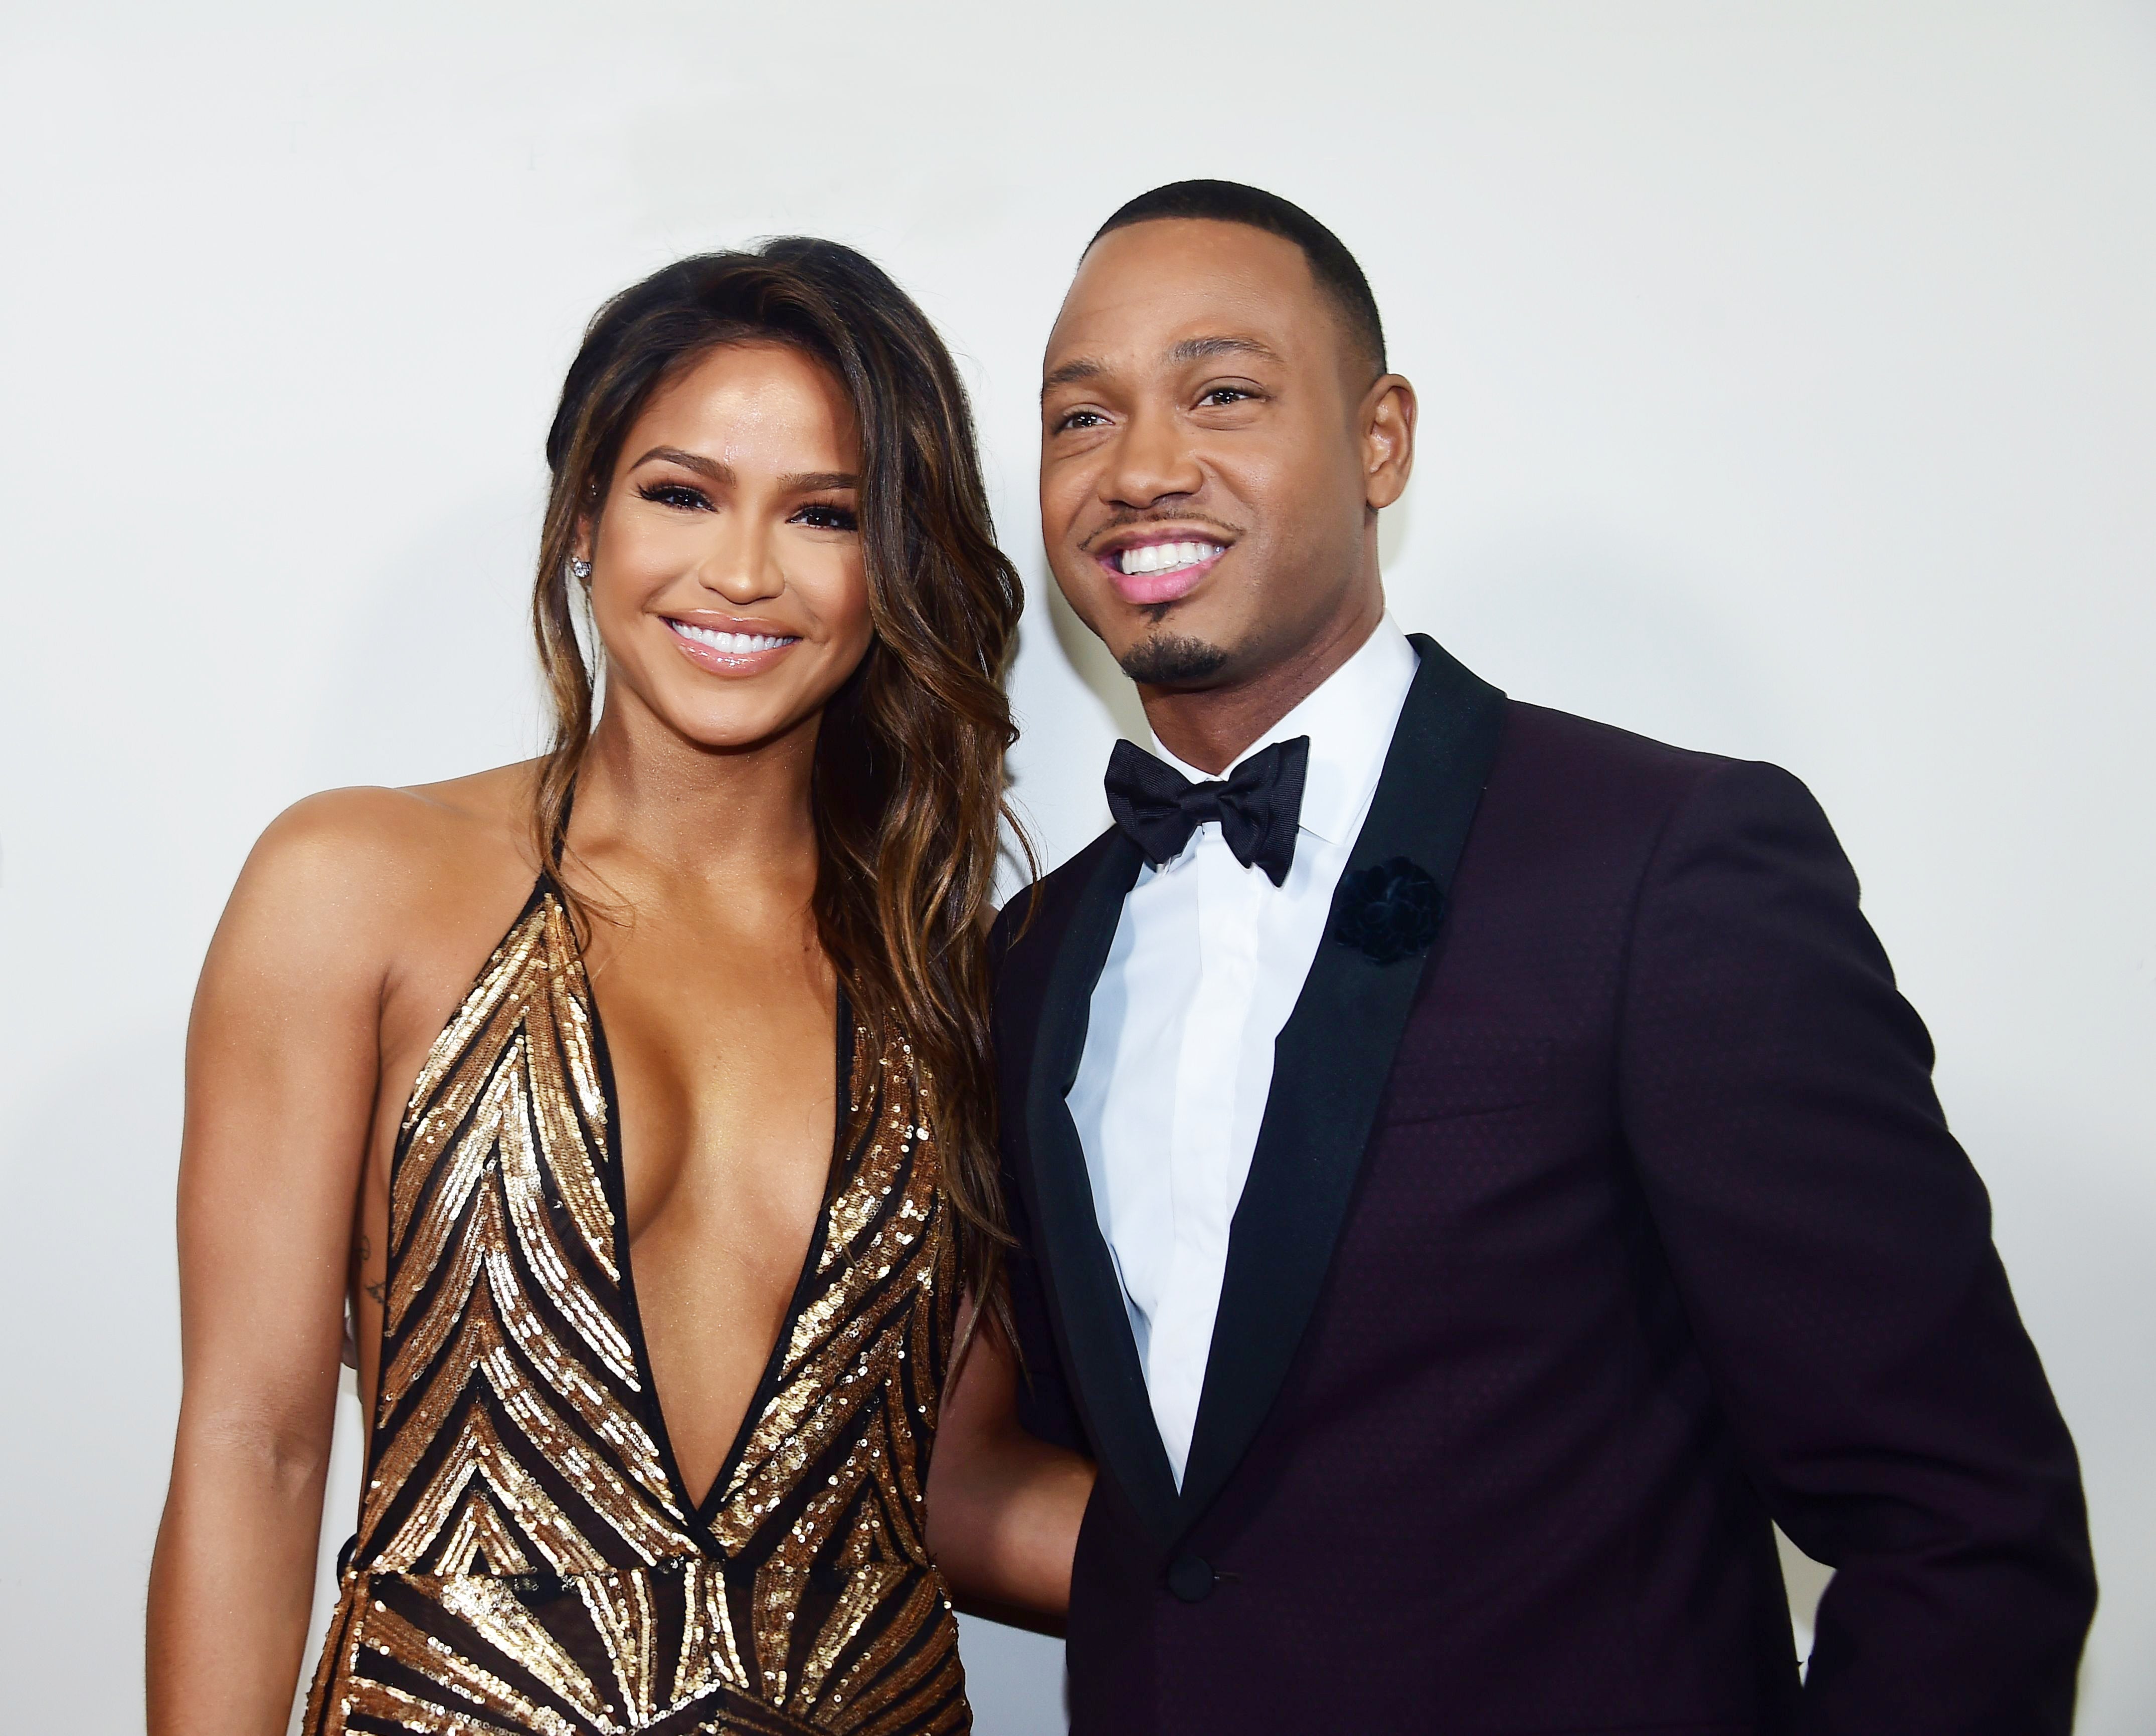 Queen Latifah, Paula Patton, Terrence J Shine at 'The Perfect Match' Premiere
